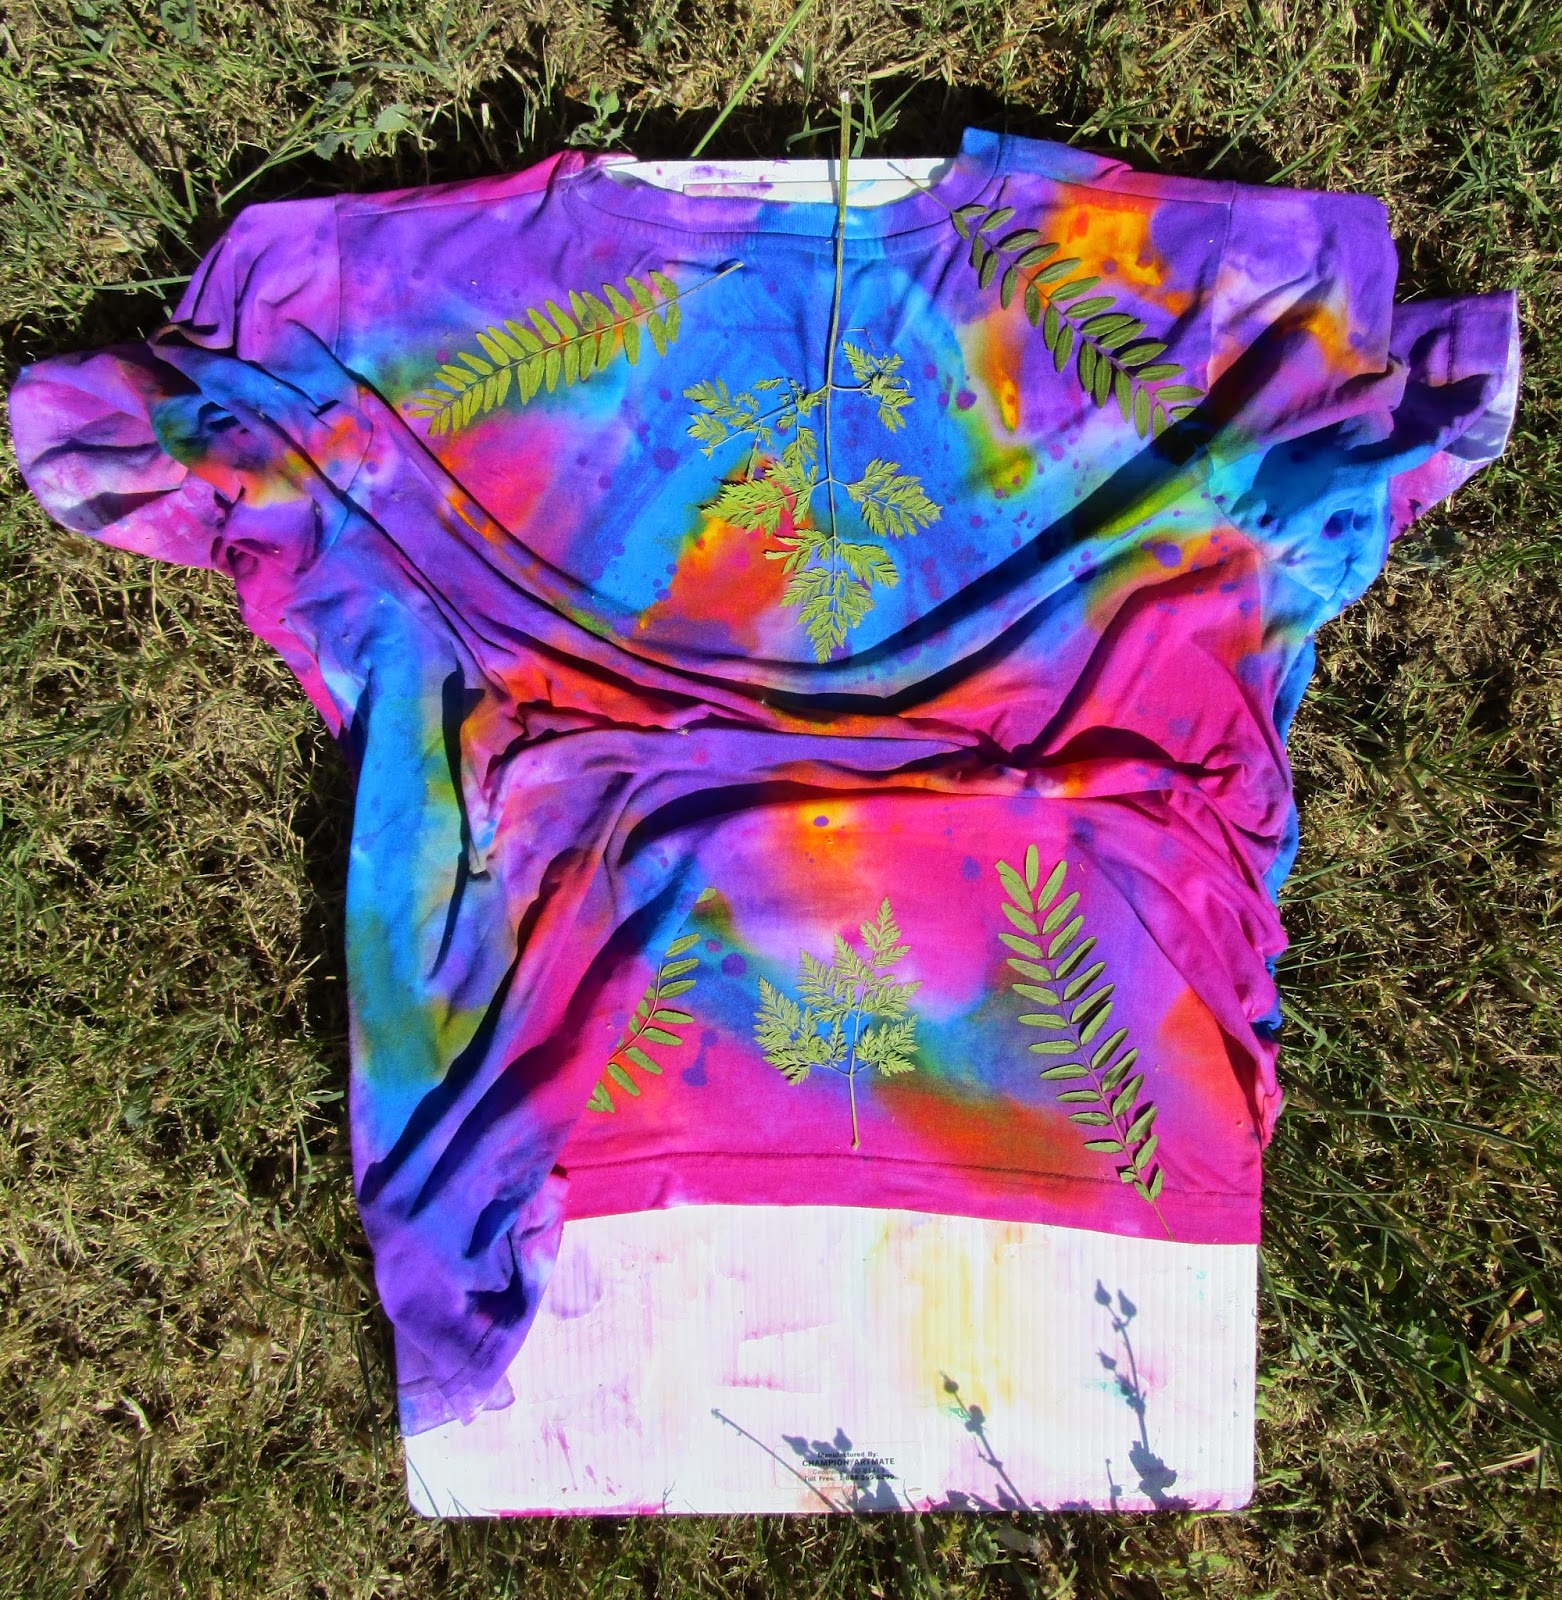 Jeanne Aird's Art Fabric and Quilts: Sun Printing and Stenciling a T-Shirt